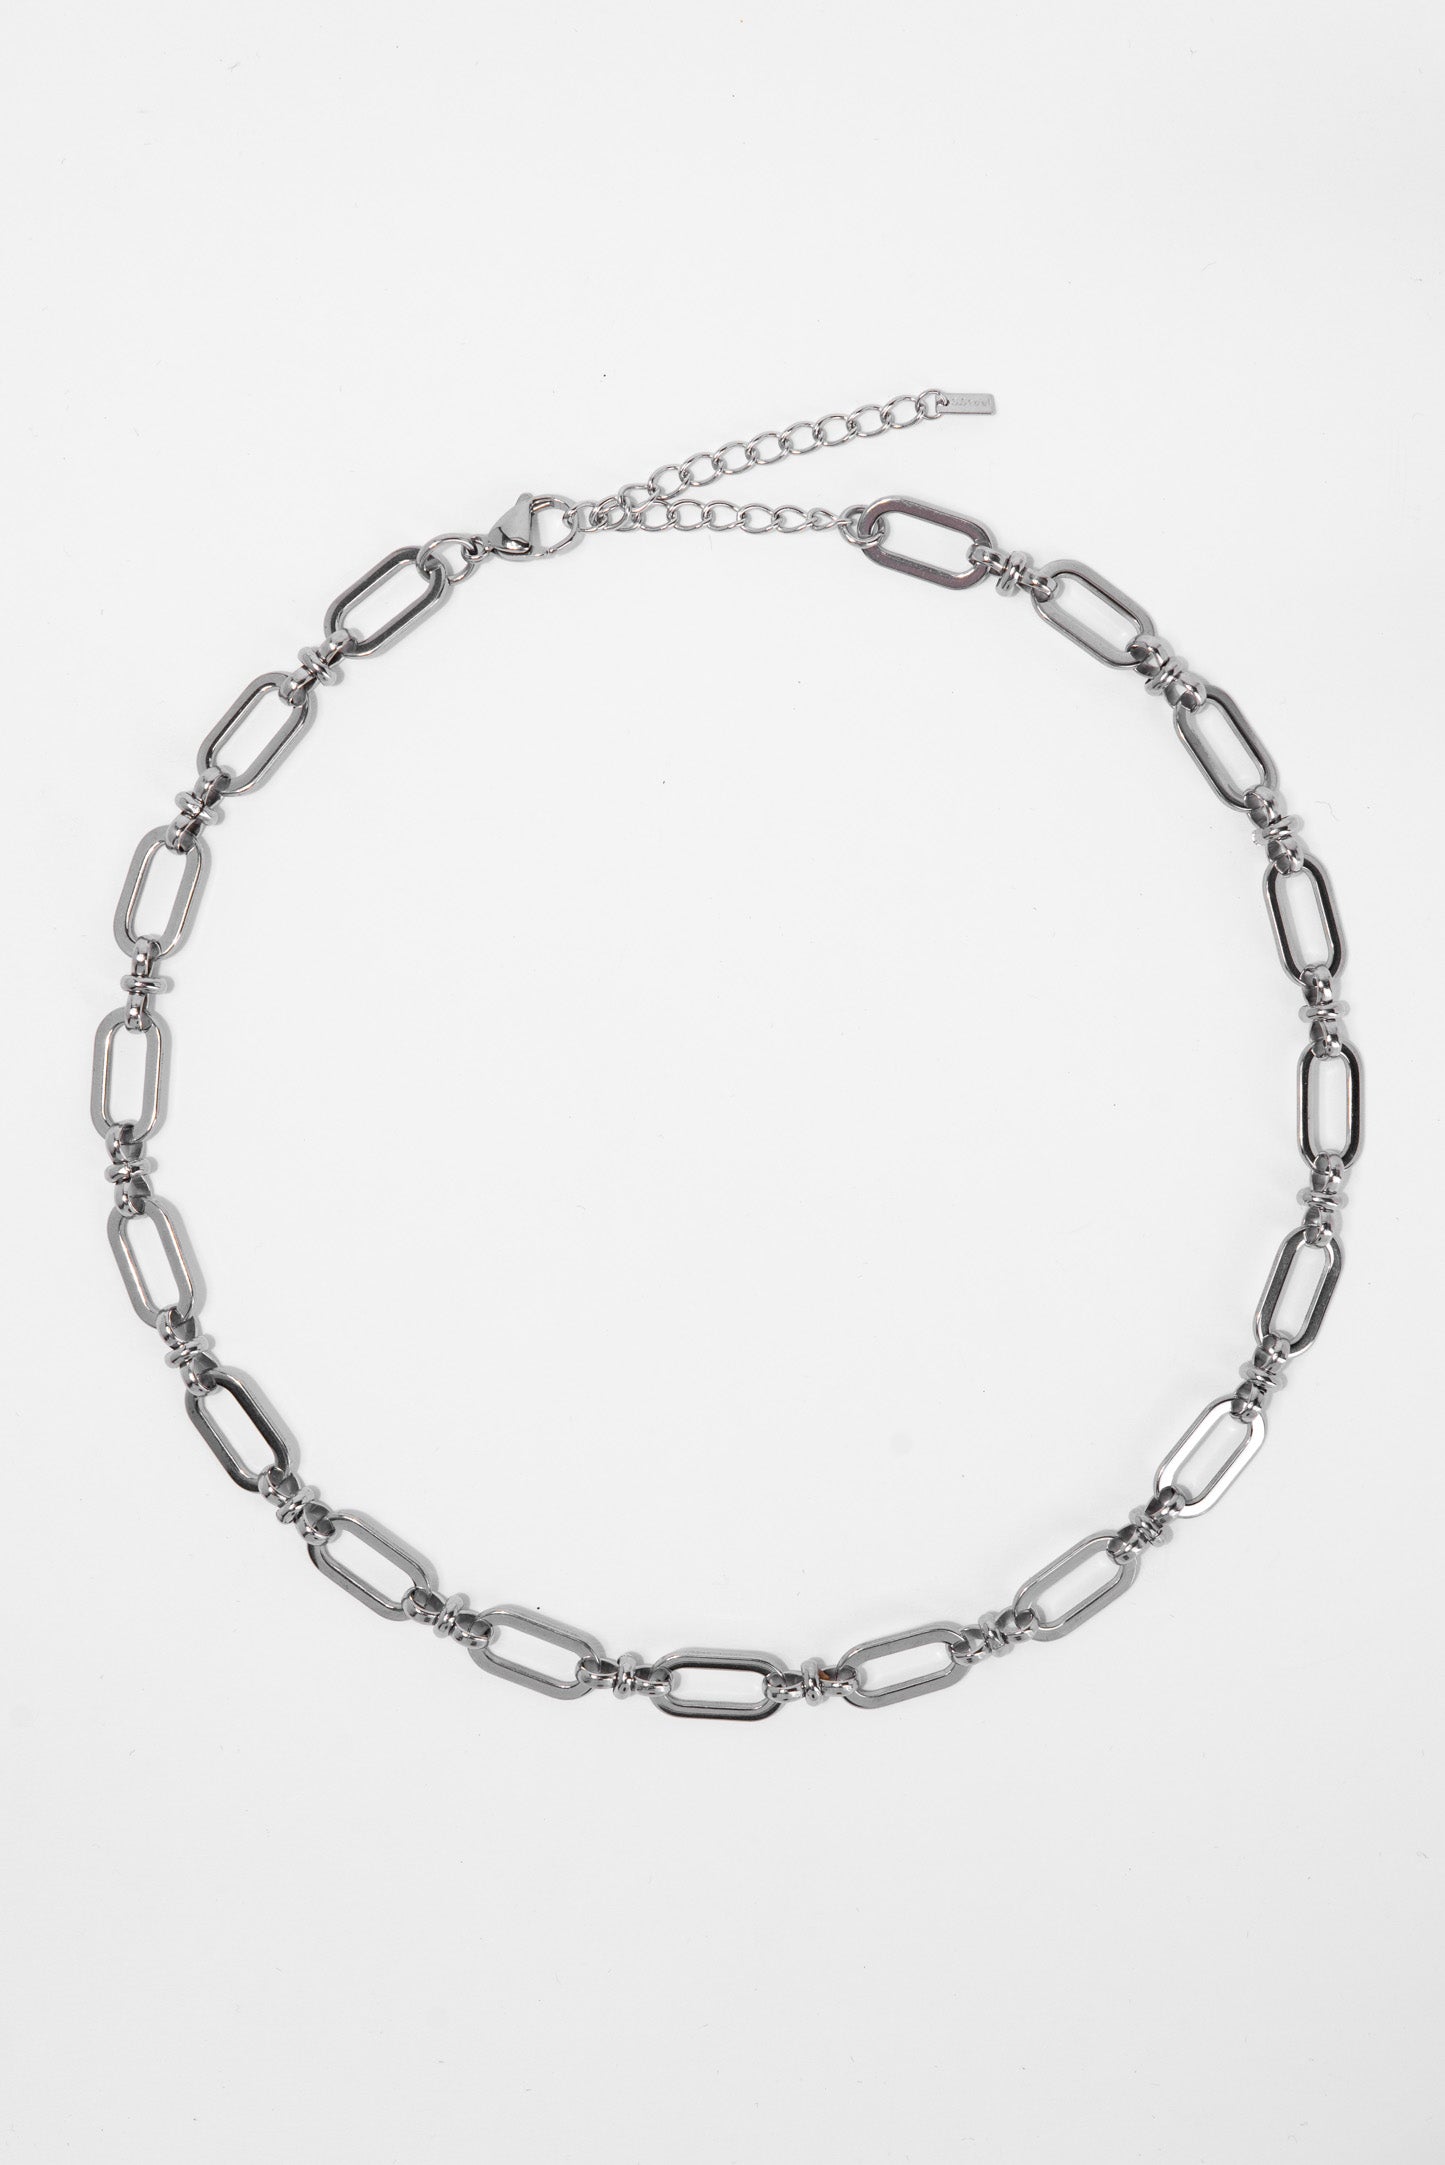 Gia Stainless Steel Handmade Chain Necklace